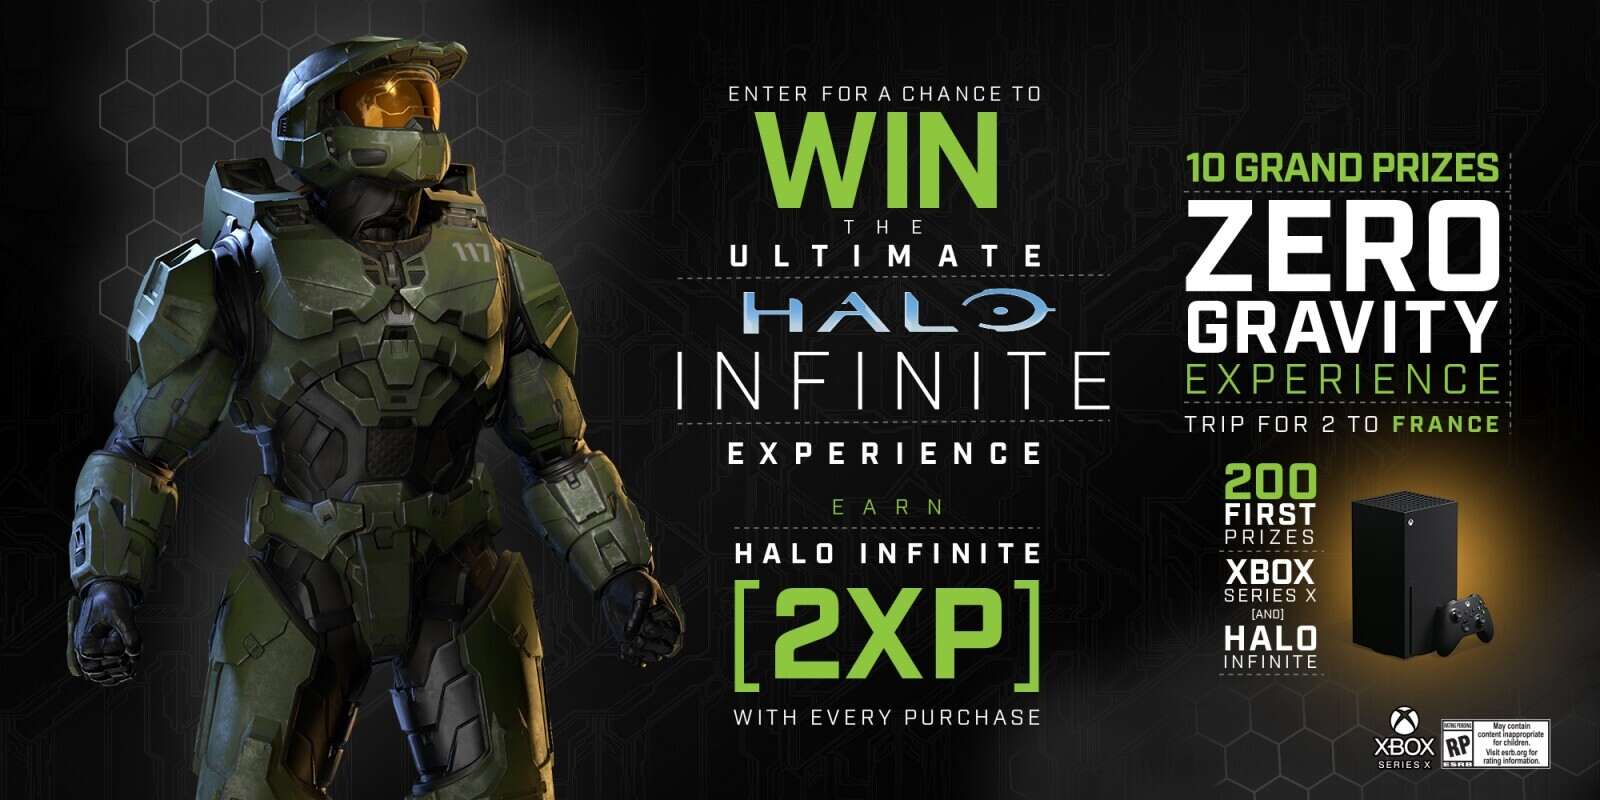 To govern Talented considerate Halo Infinite & Monster Energy Promo | Win XP, an XBox, and More